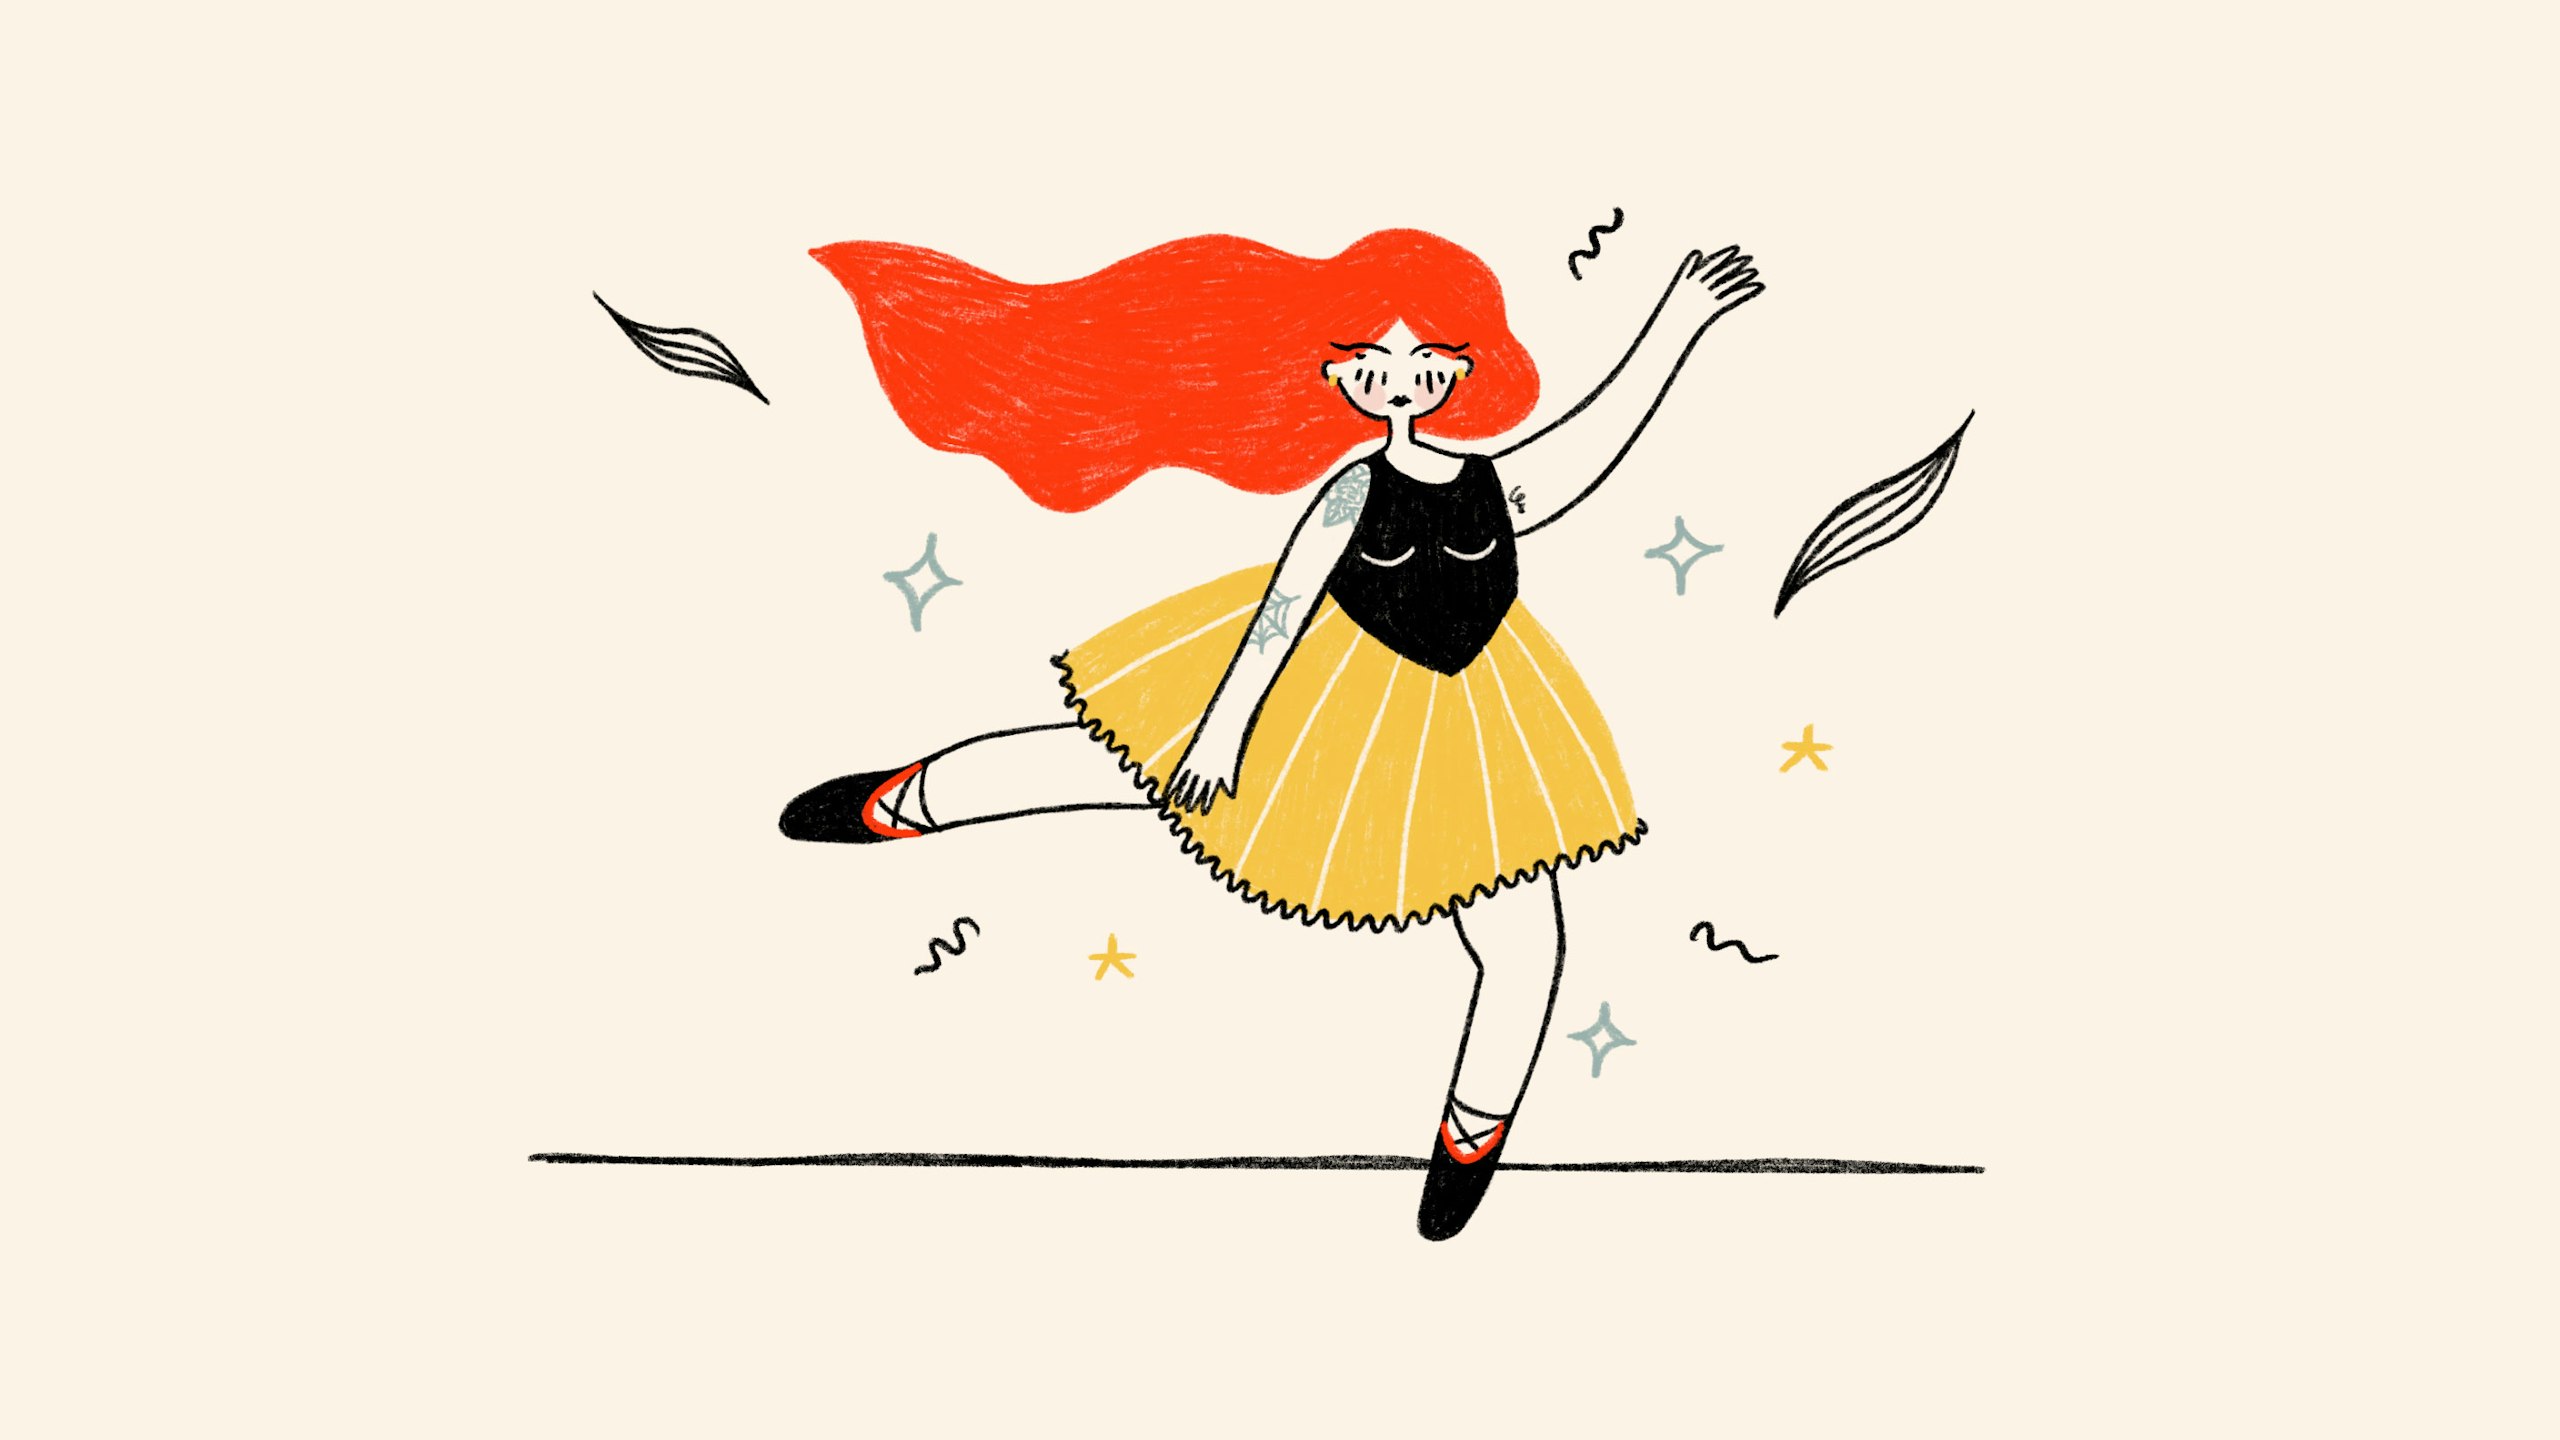 Tattooed Ballerina with red hair dancing, Illustration by Celeste Caiello